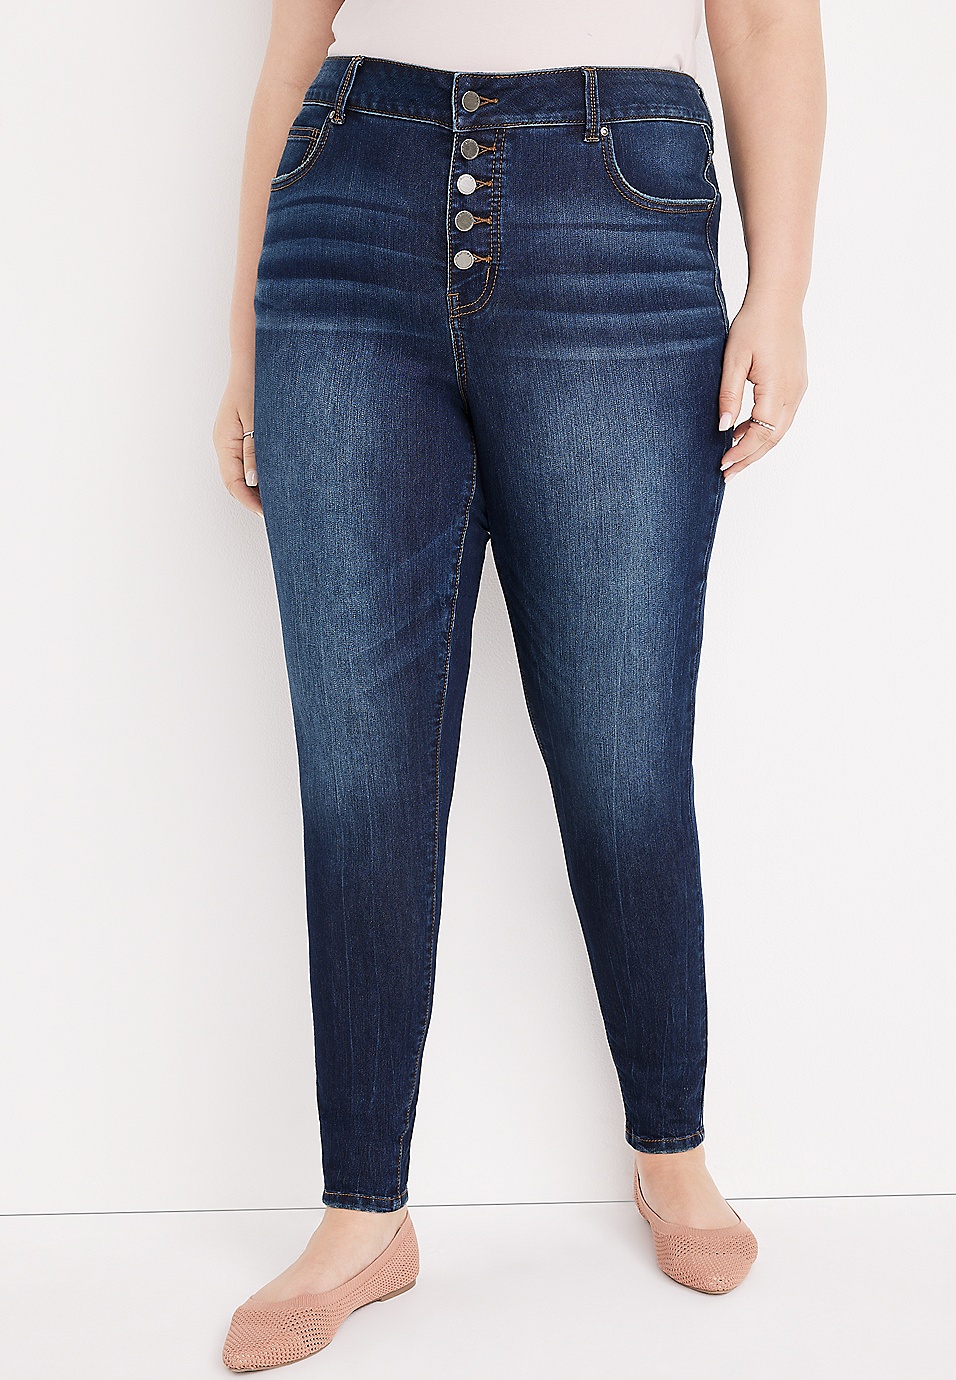 Plus Size m jeans by maurices™ Everflex™ Super Skinny High Rise